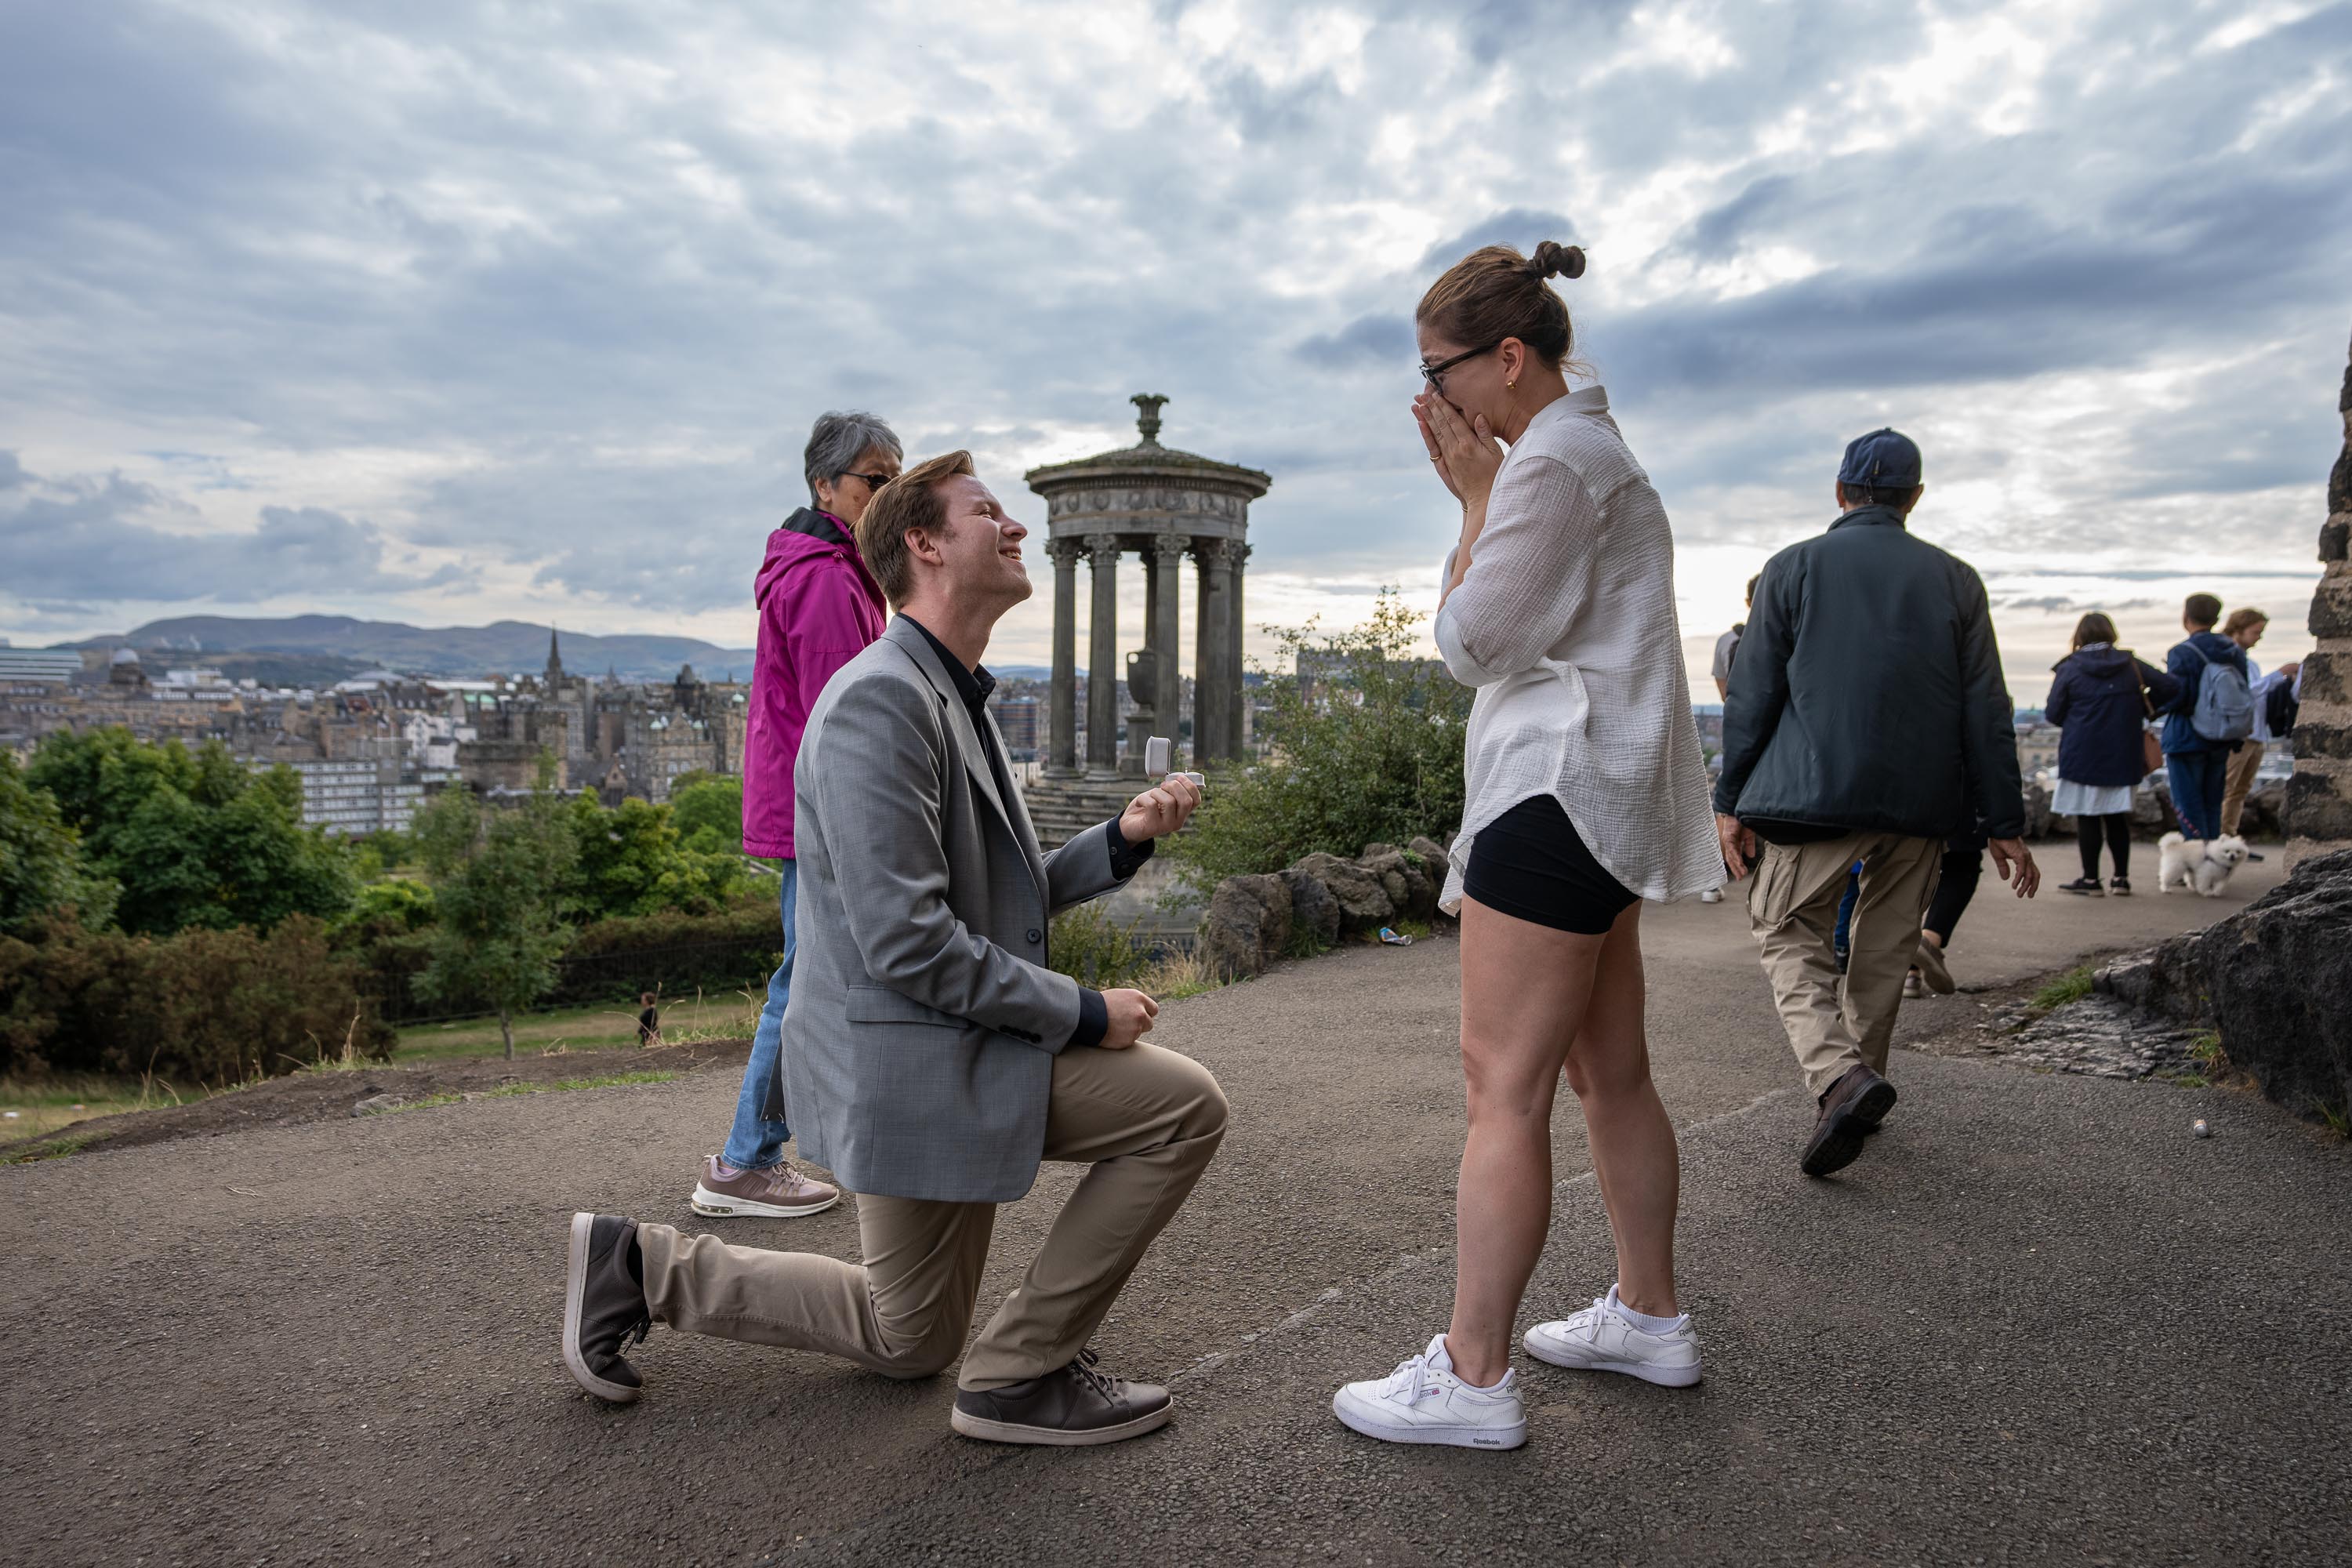 Tristian Rais-Sherman, the Orchestra’s new conducting fellow, took advantage of the romantic surroundings to propose to his girlfriend